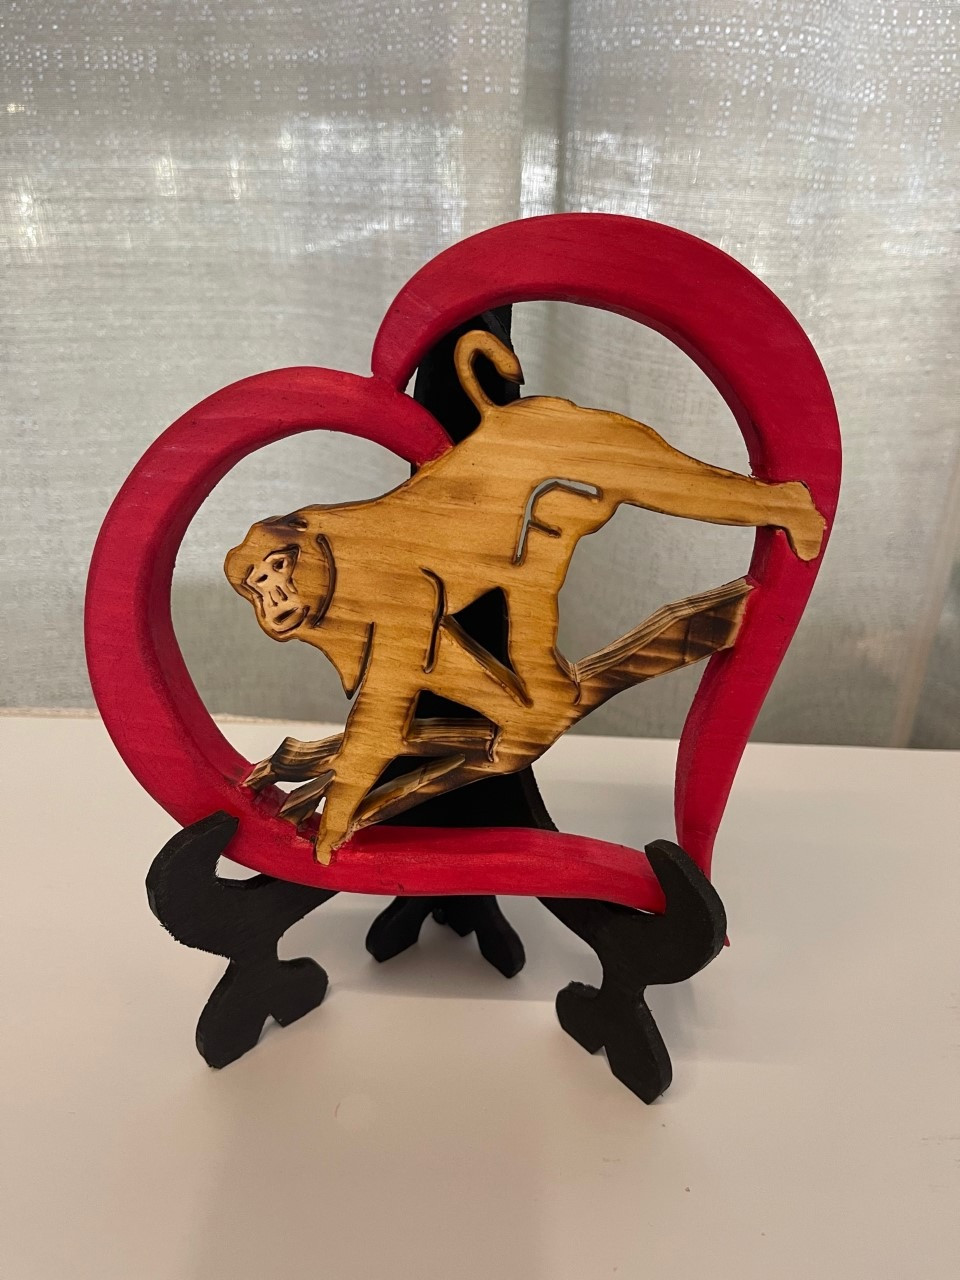 Hand Carved & Painted Wood Heart with Monkey (and display stand).  Artist: Dawn Conover "Old Rustic Crow".  (7" x 7" on display stand)